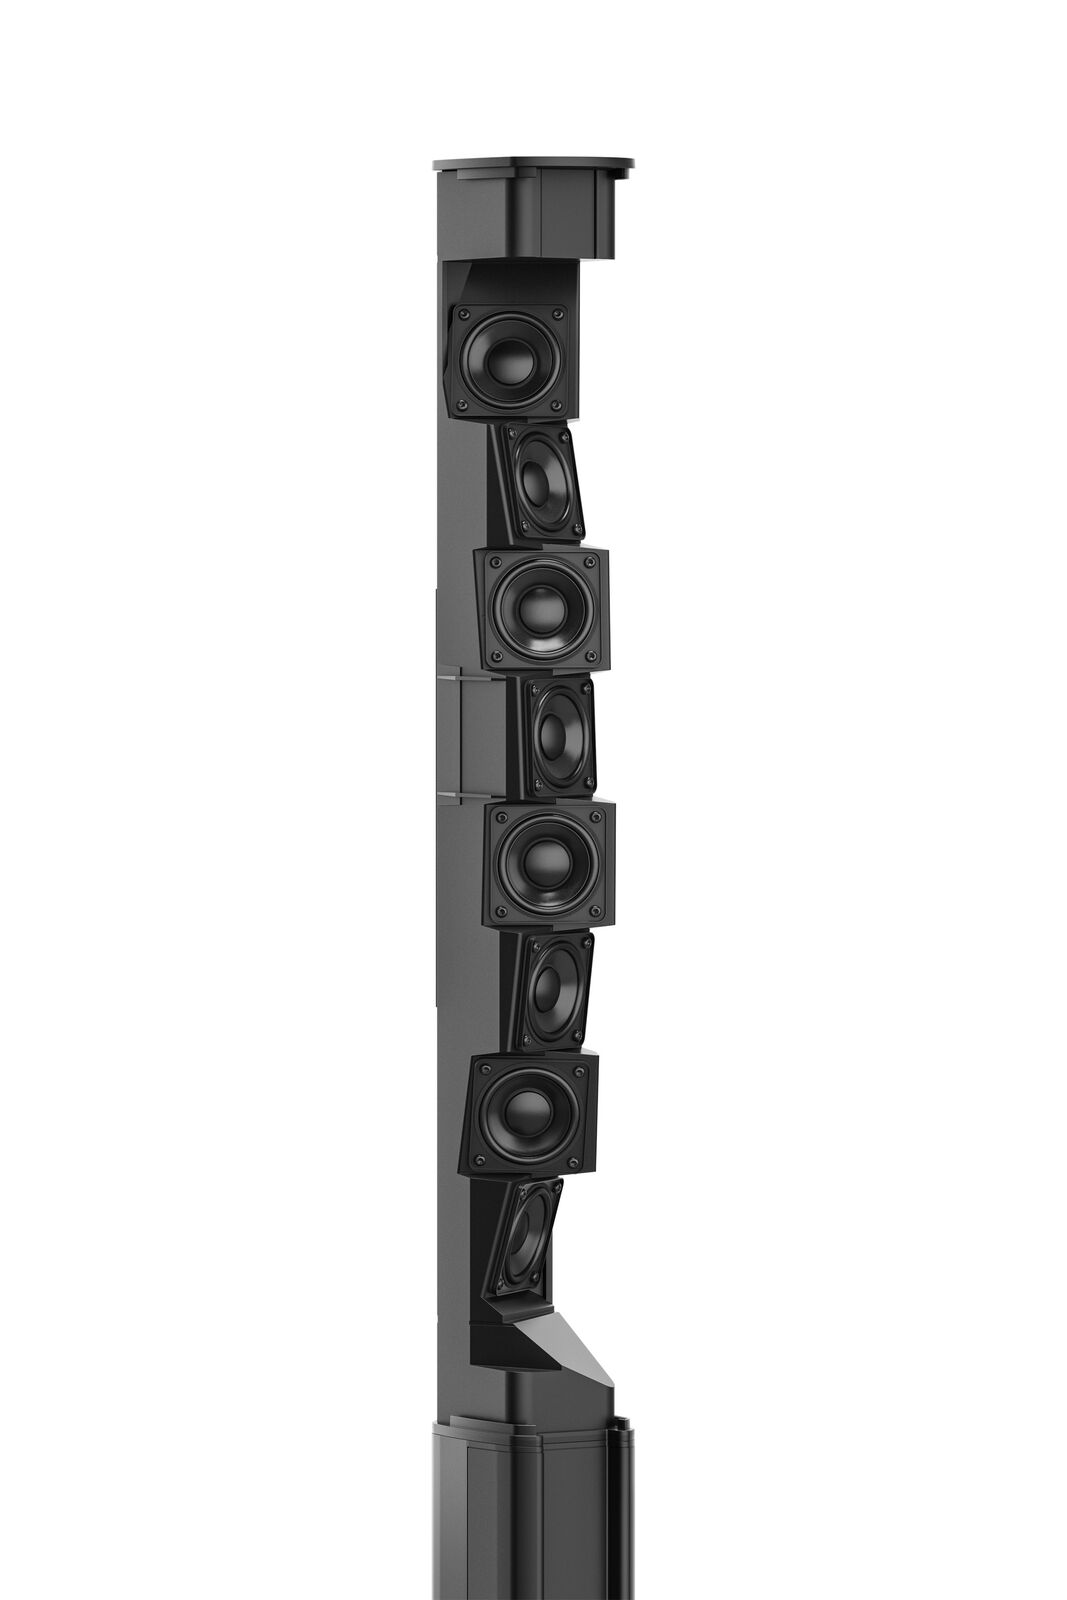 Bose Pro L1 Pro8 Portable Line Array System with Bluetooth (840919-1100)